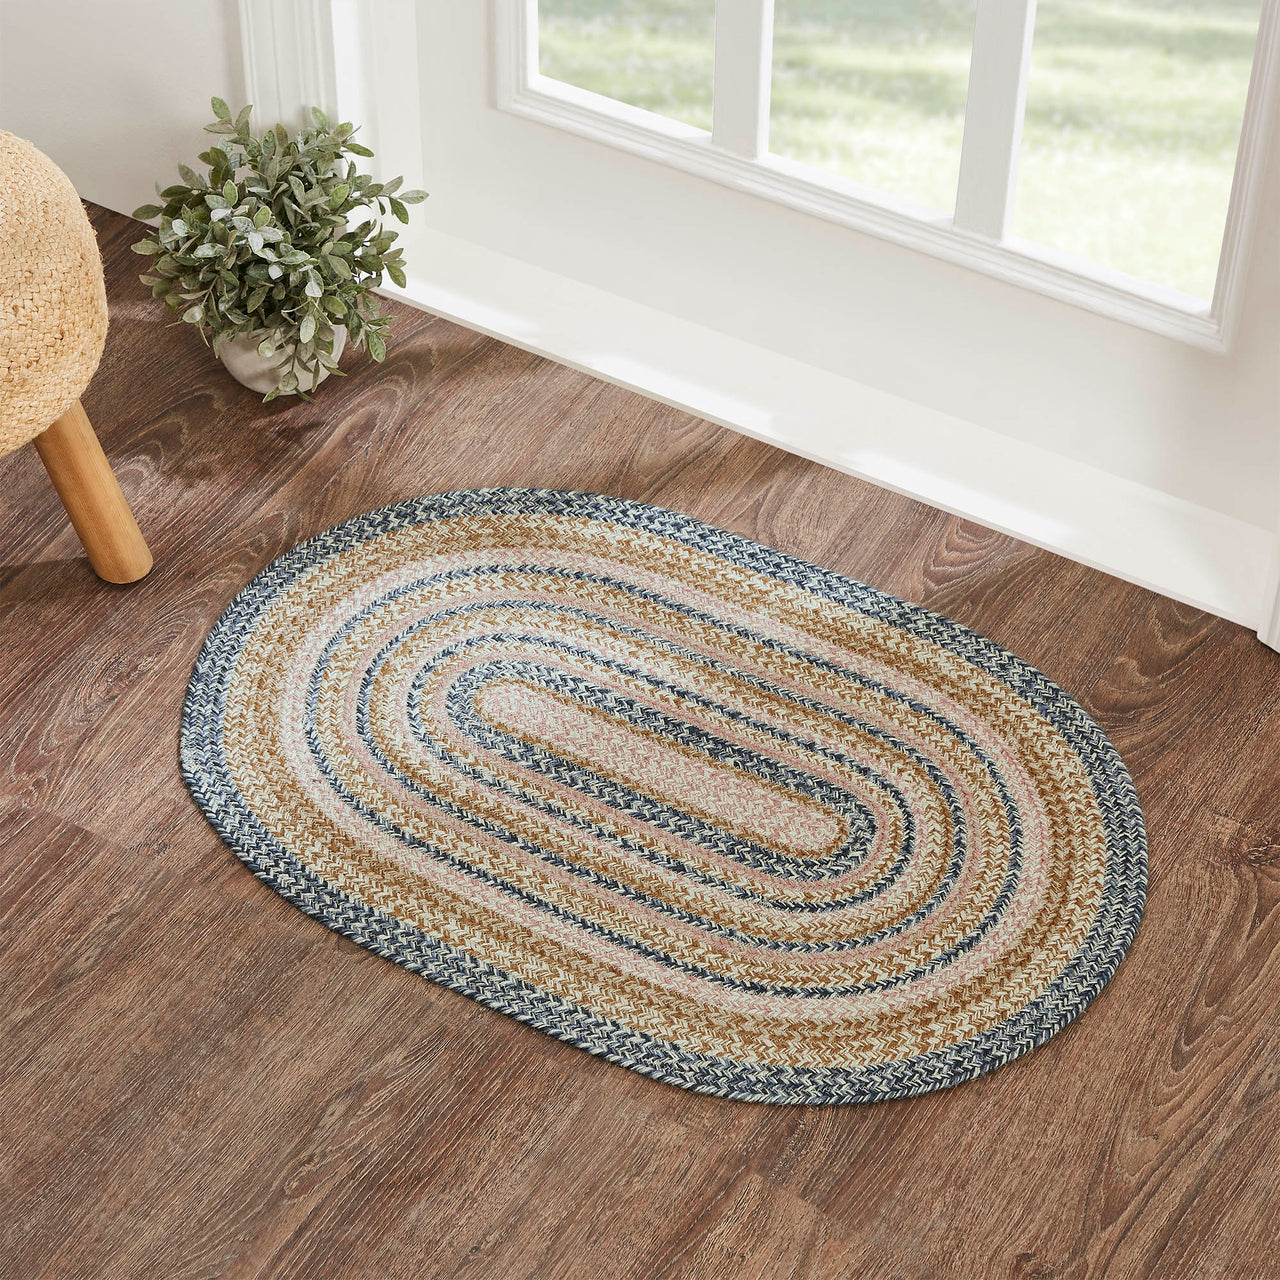 Kaila Jute Braided Rug Oval with Rug Pad 24"x36" (2'x3') VHC Brands